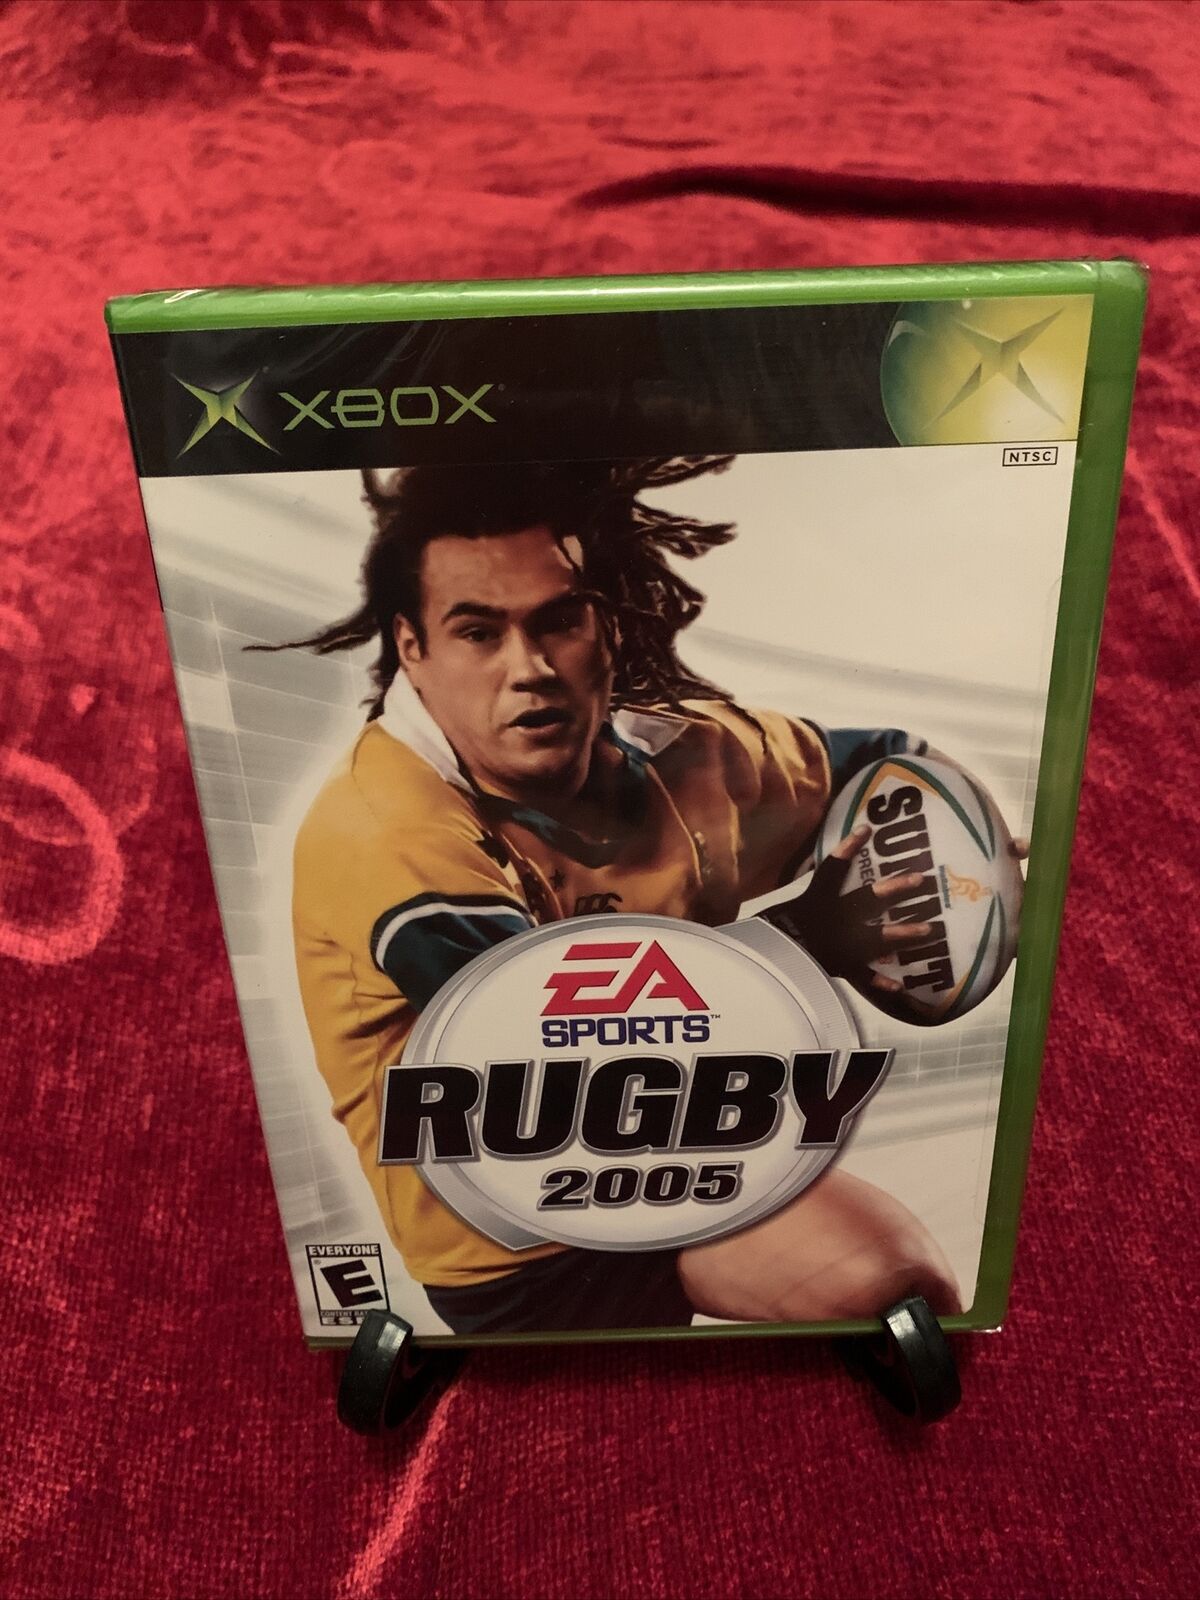 Rugby 2005 Xbox